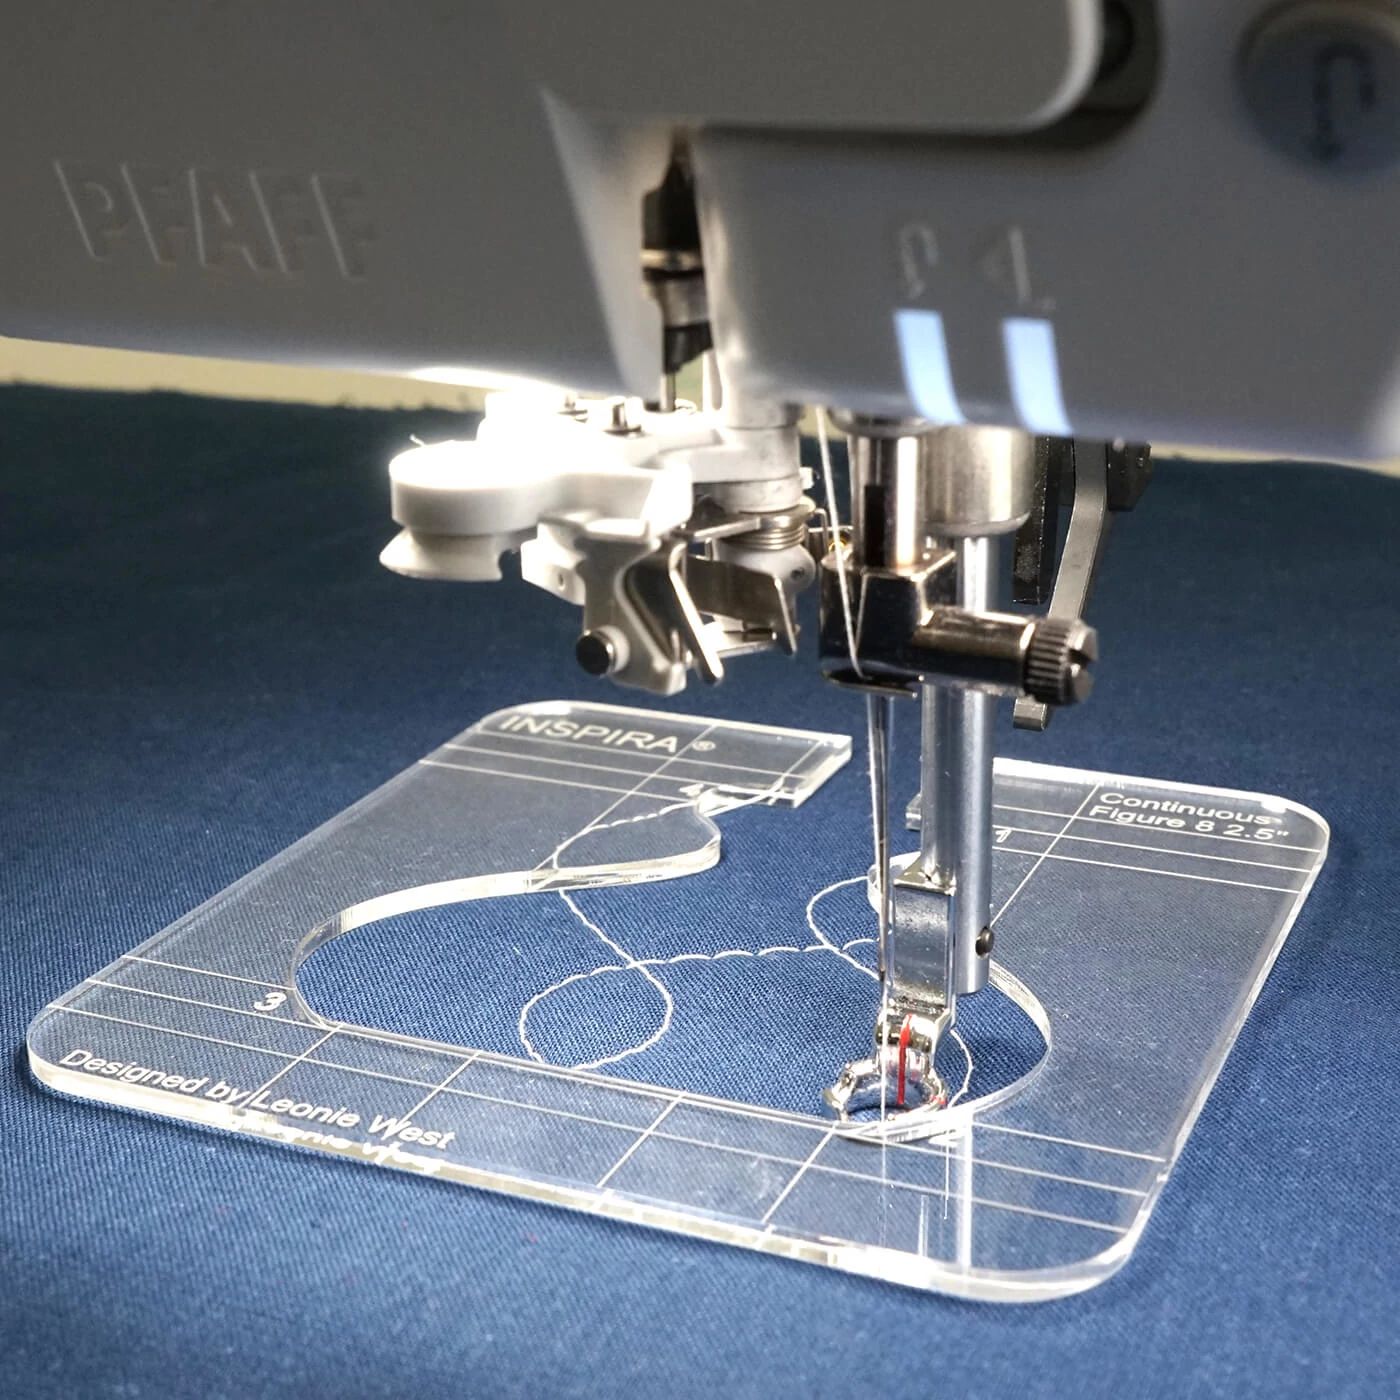 Free Motion Quilting Templates, Sewing Machine Accessories